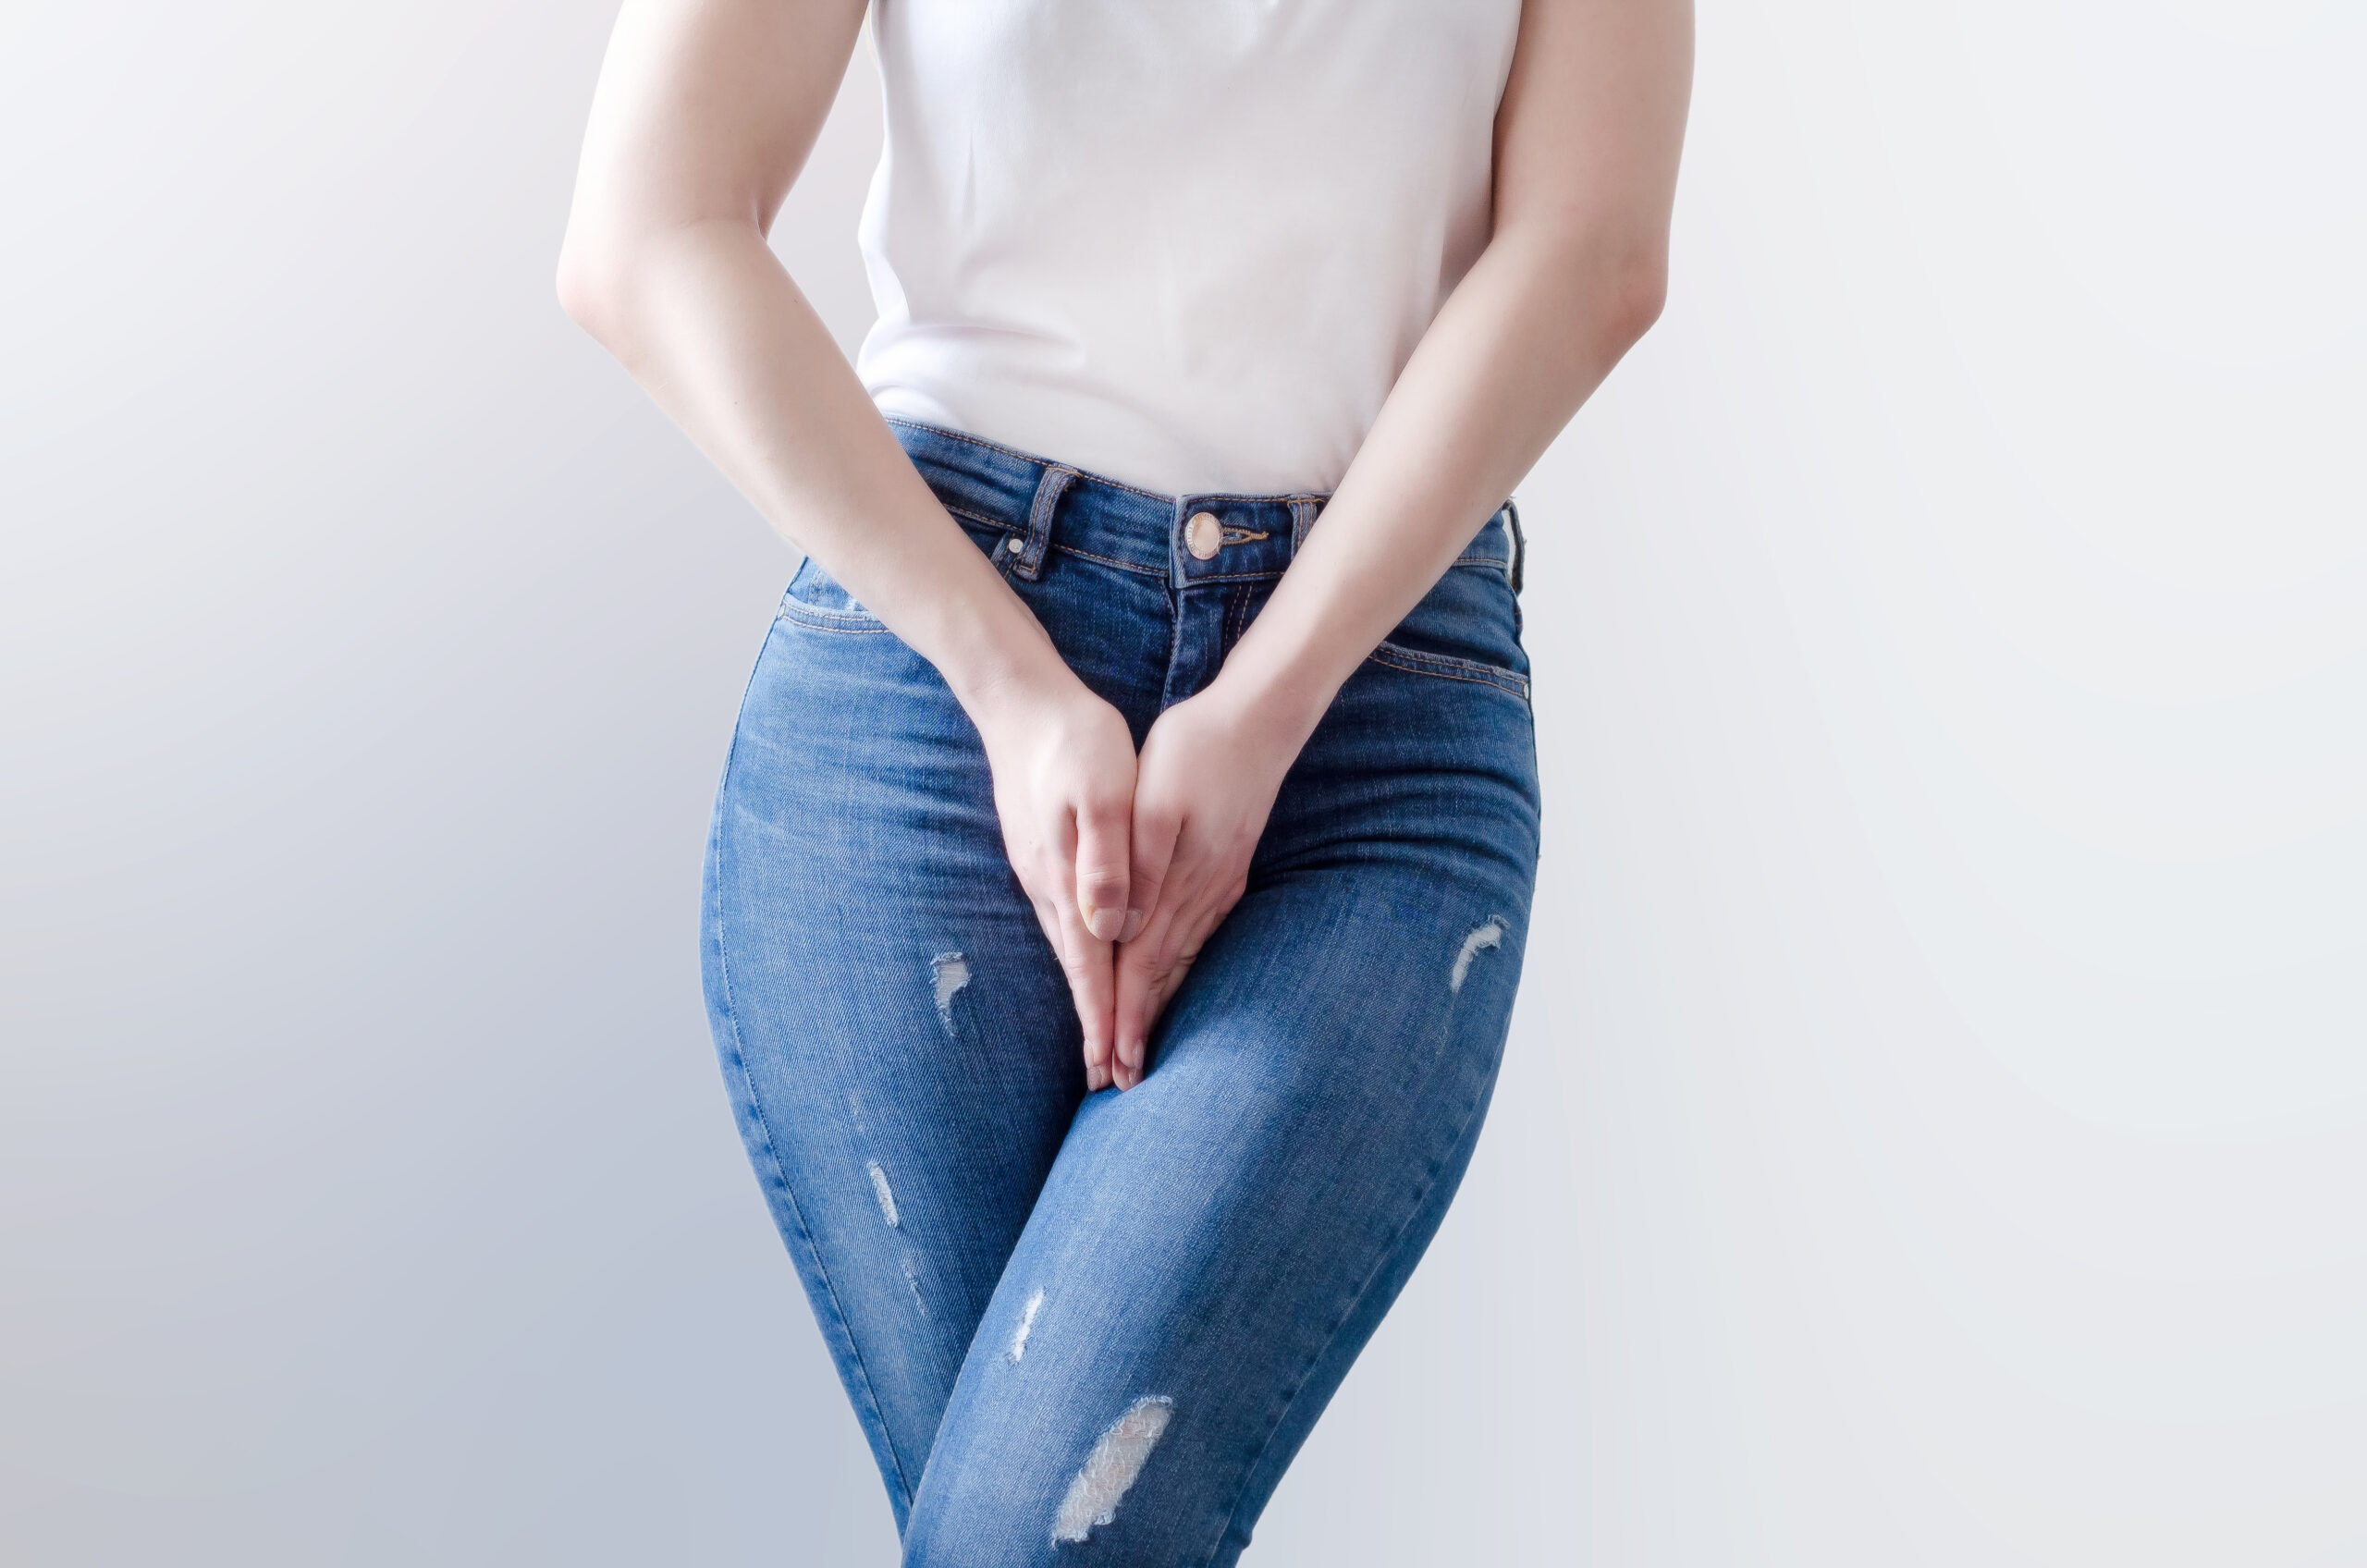 Young woman in jeans standing with her hands between legs